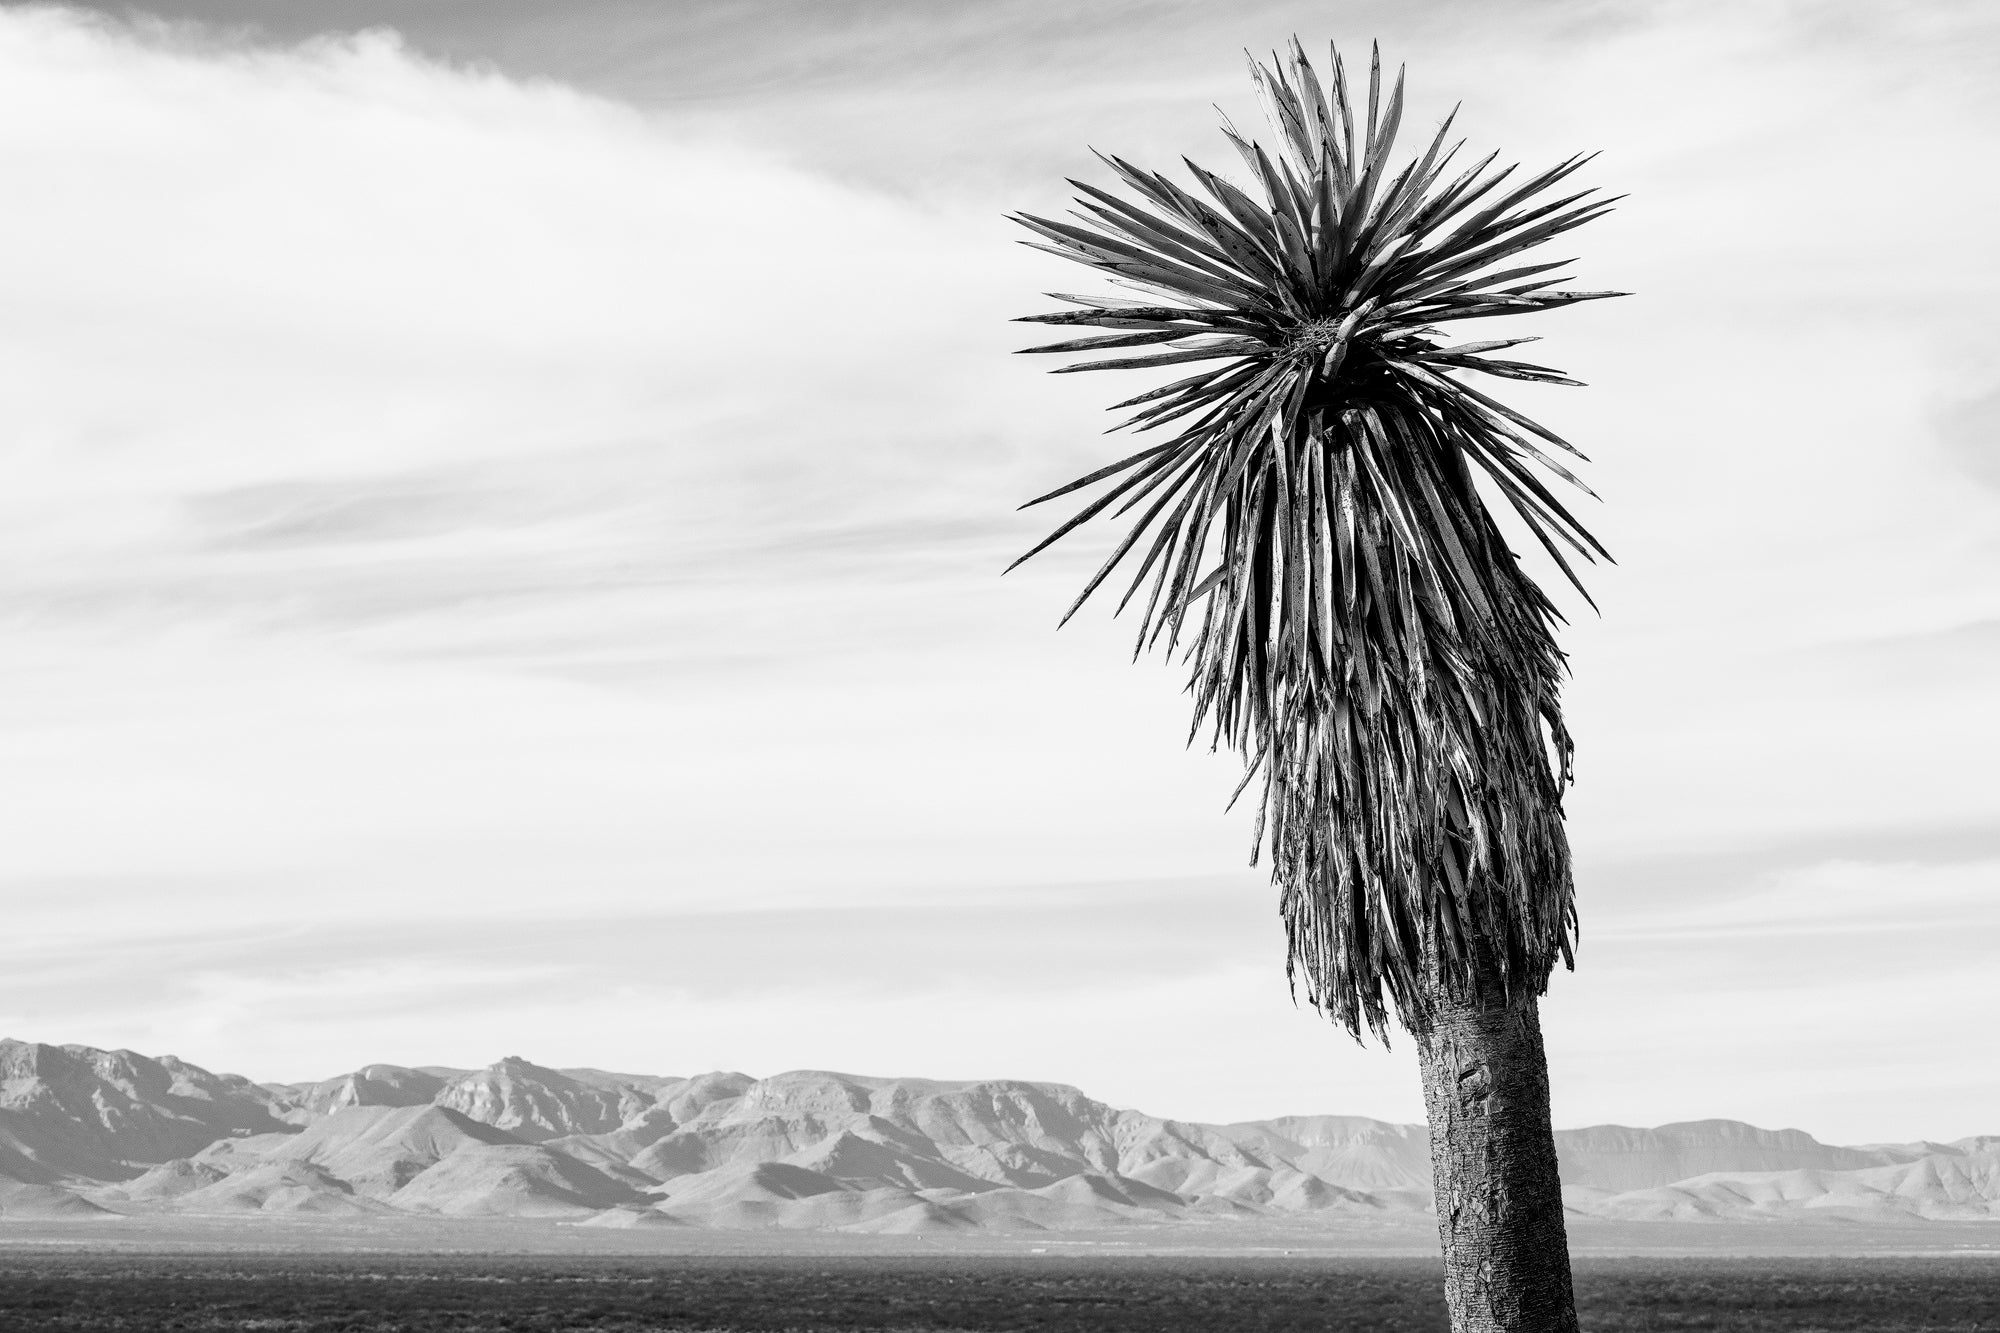 Tall Desert Yucca with Mountains on the Horizon: Black and White Landscape Photograph by Keith Dotson. Click to buy a fine art print.